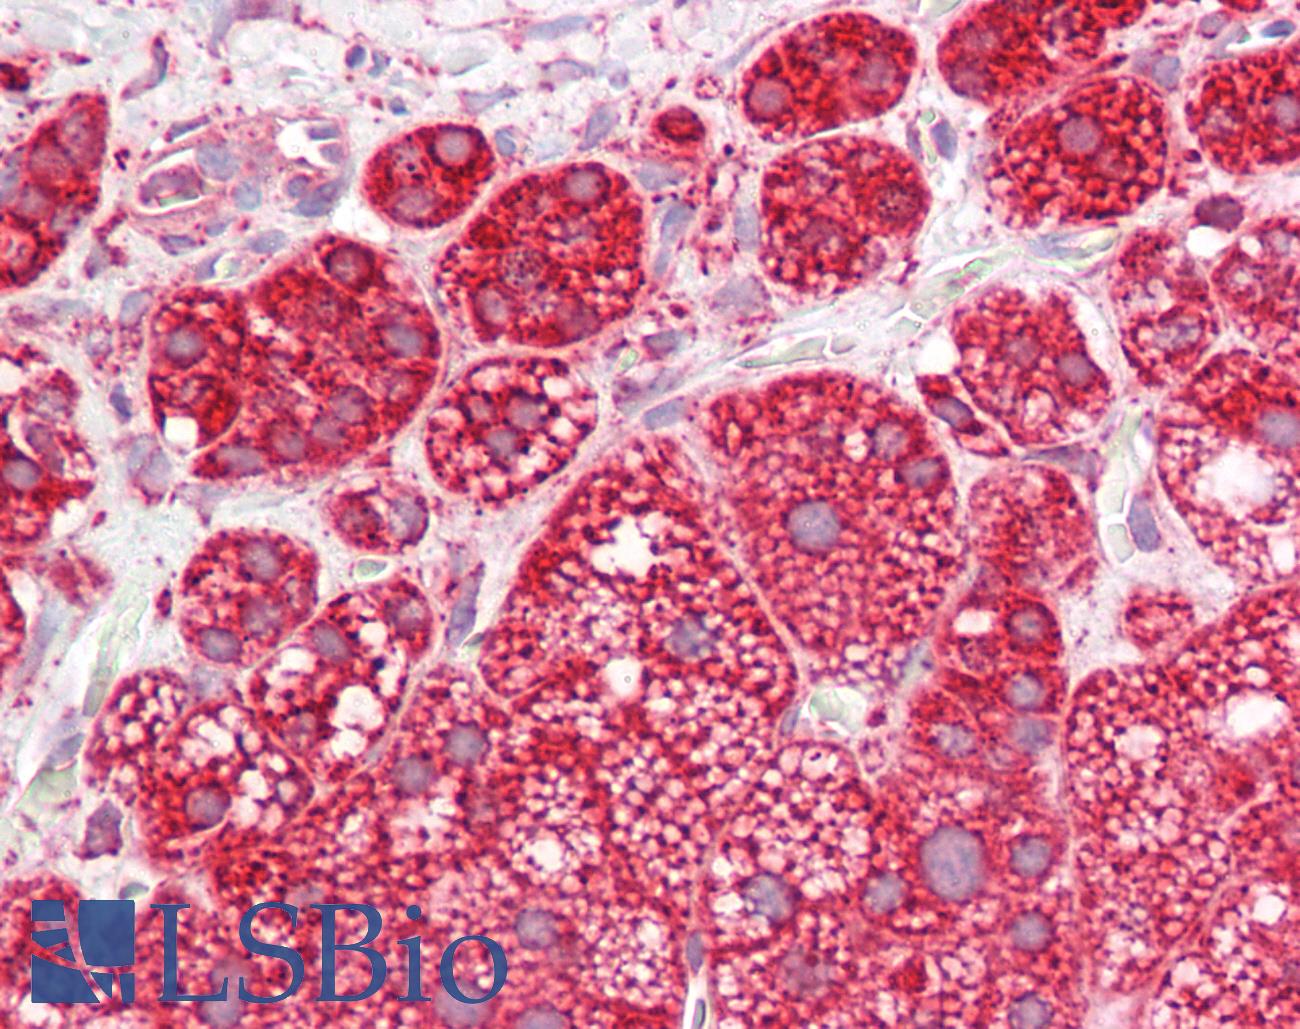 PPIF / Cyclophilin F Antibody - Anti-PPIF / Cyclophilin F antibody IHC of human adrenal. Immunohistochemistry of formalin-fixed, paraffin-embedded tissue after heat-induced antigen retrieval. Antibody dilution 1:100.